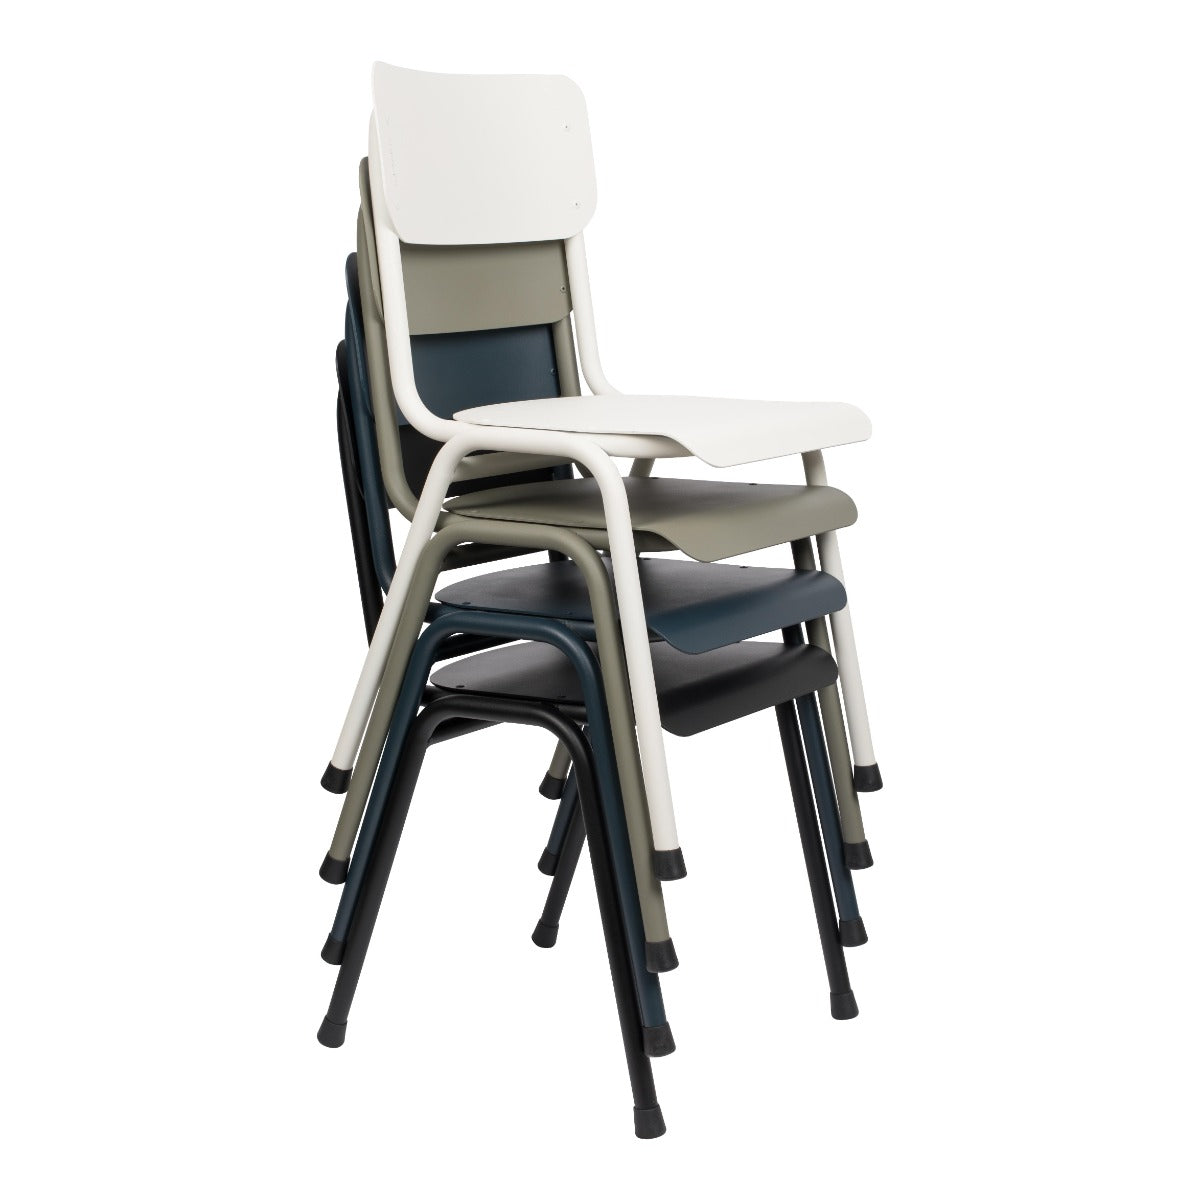 BACK TO SCHOOL outdoor chair black, Zuiver, Eye on Design